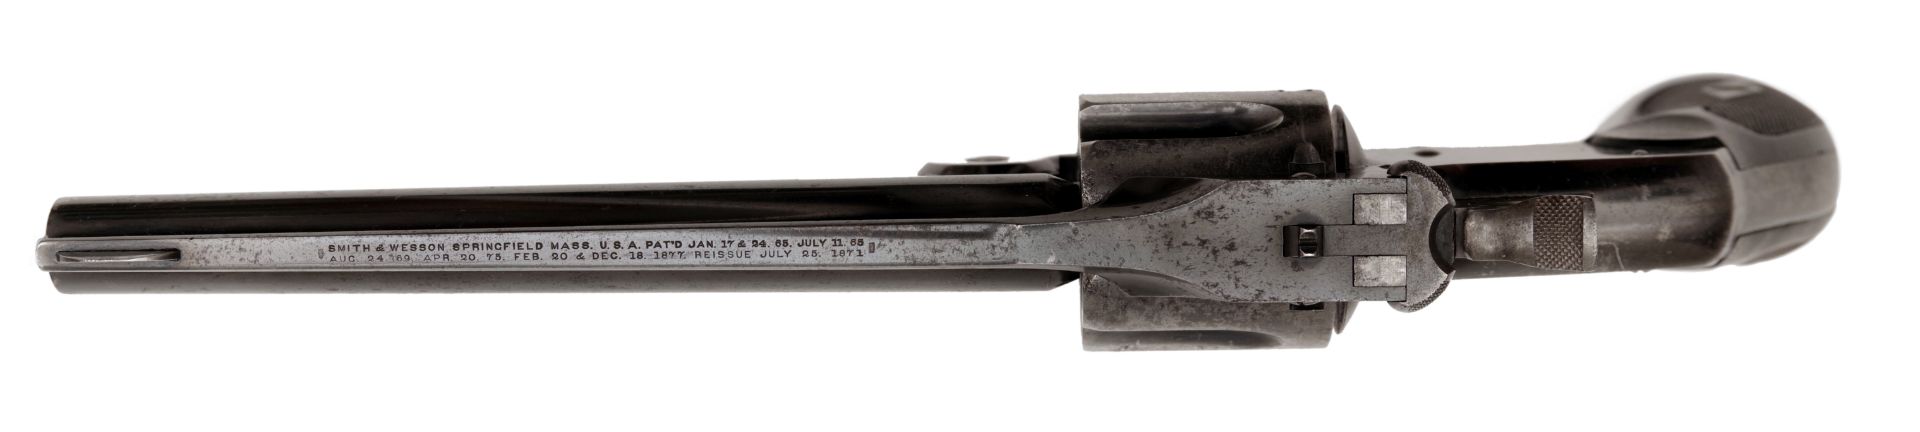 Revolver Smith & Wesson New Model No. 3 Russian - Image 5 of 5